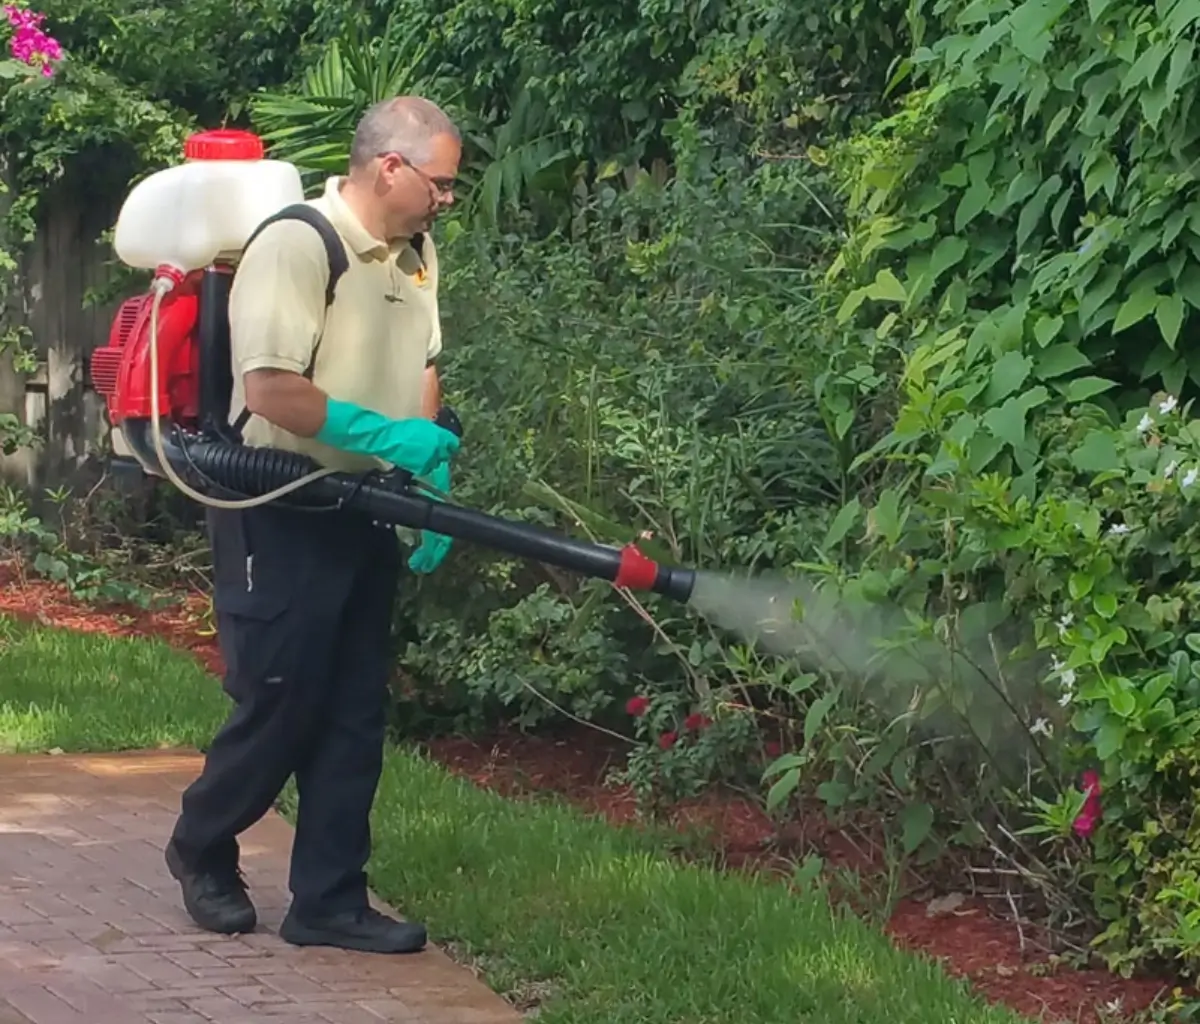 Mosquito Pest Control services by Petri Pest Control in South Florida